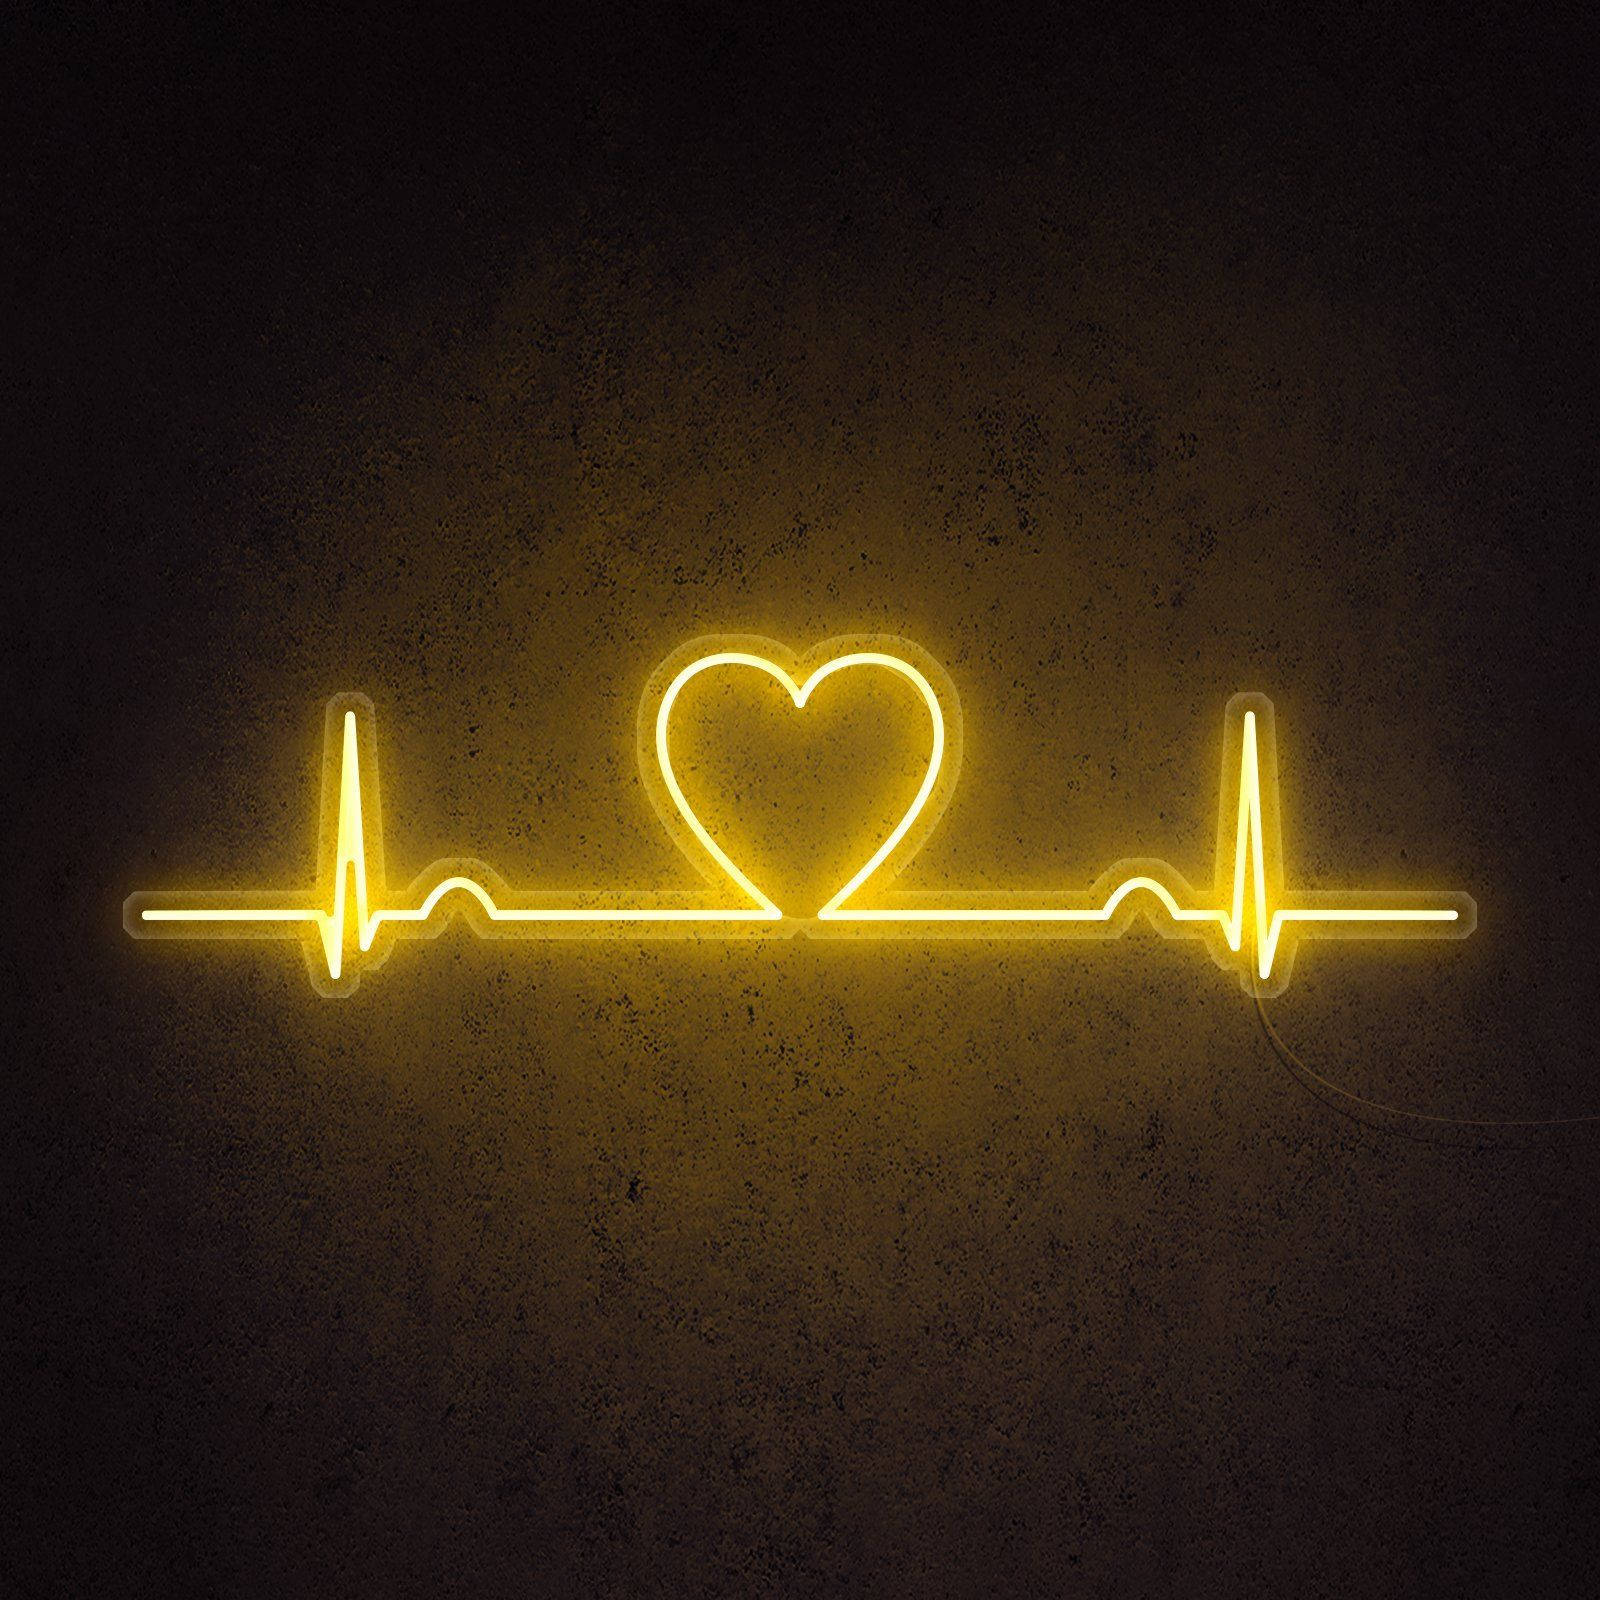 Neon Glowing Lines Heartbeat Concept Lifeline Background Wallpaper Design  Stock Illustration  Download Image Now  iStock